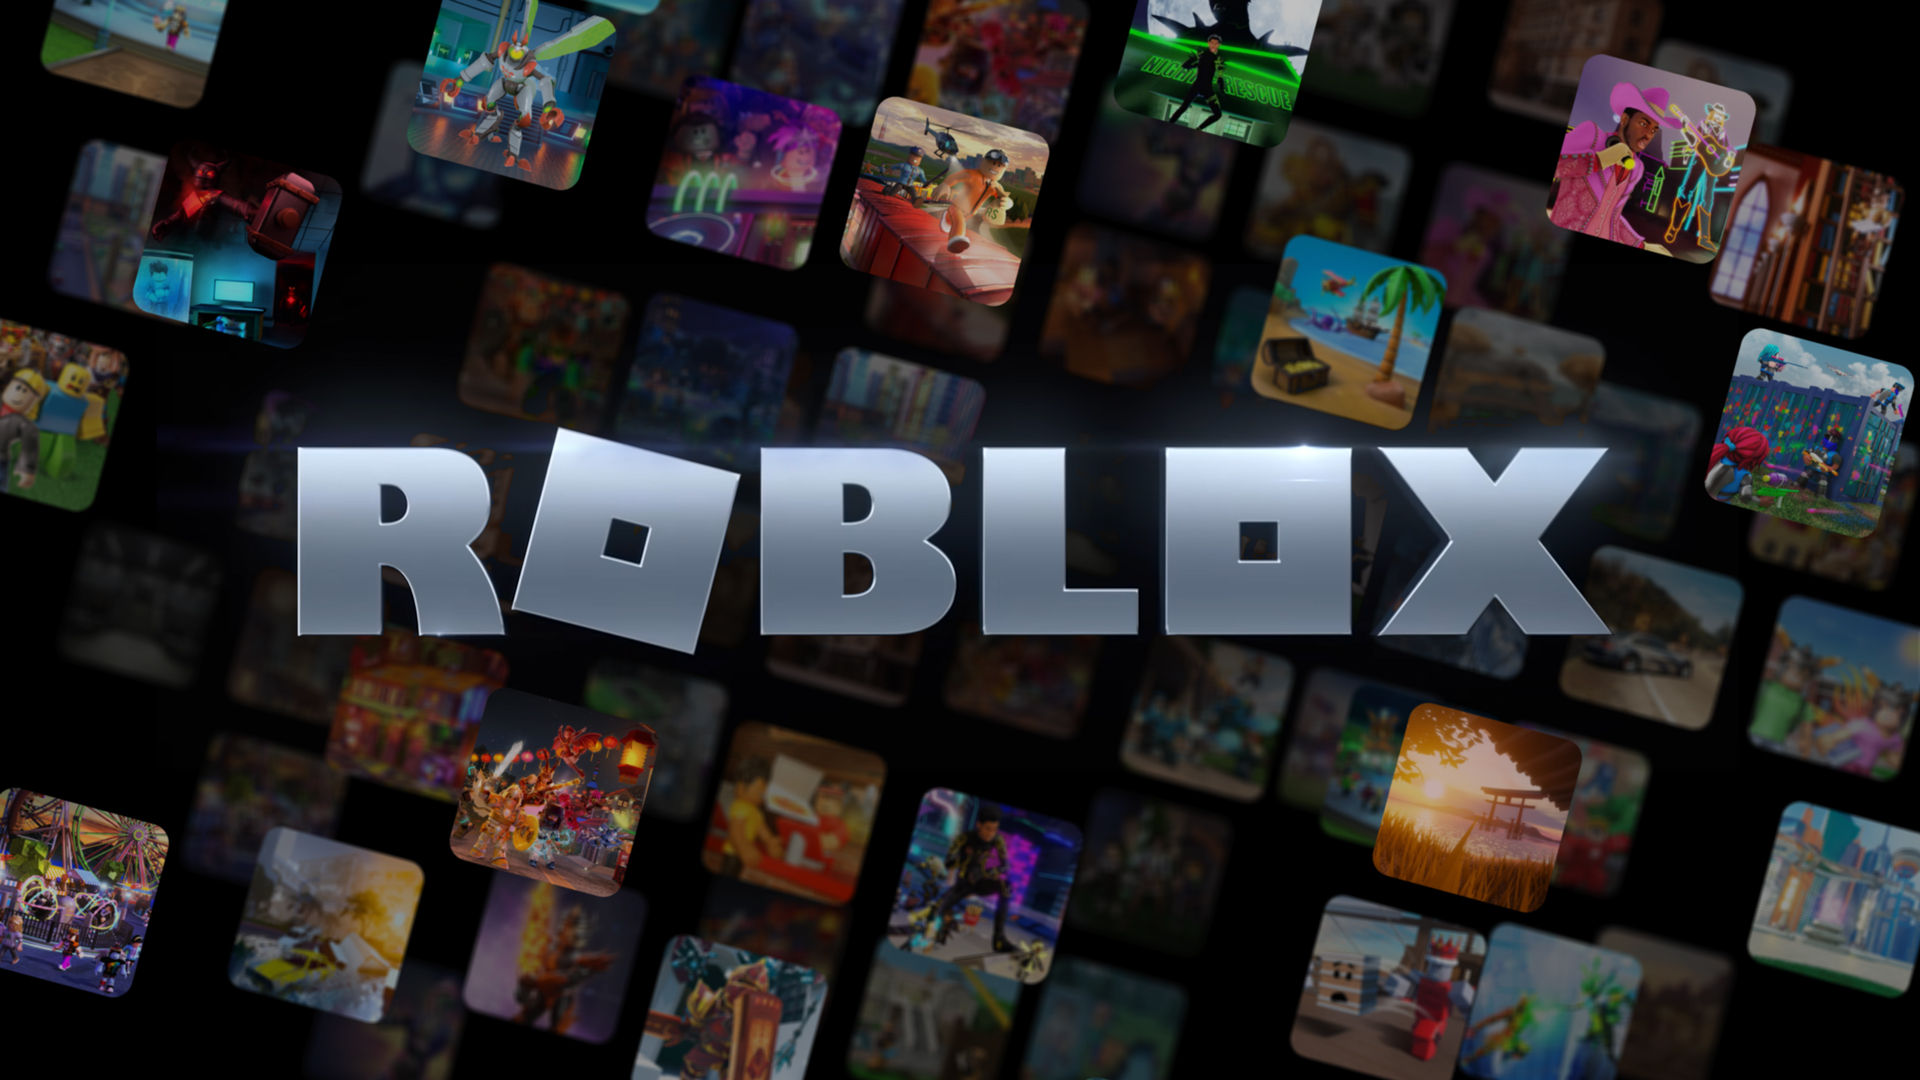 Internal Roblox documents have been stolen and posted online in an